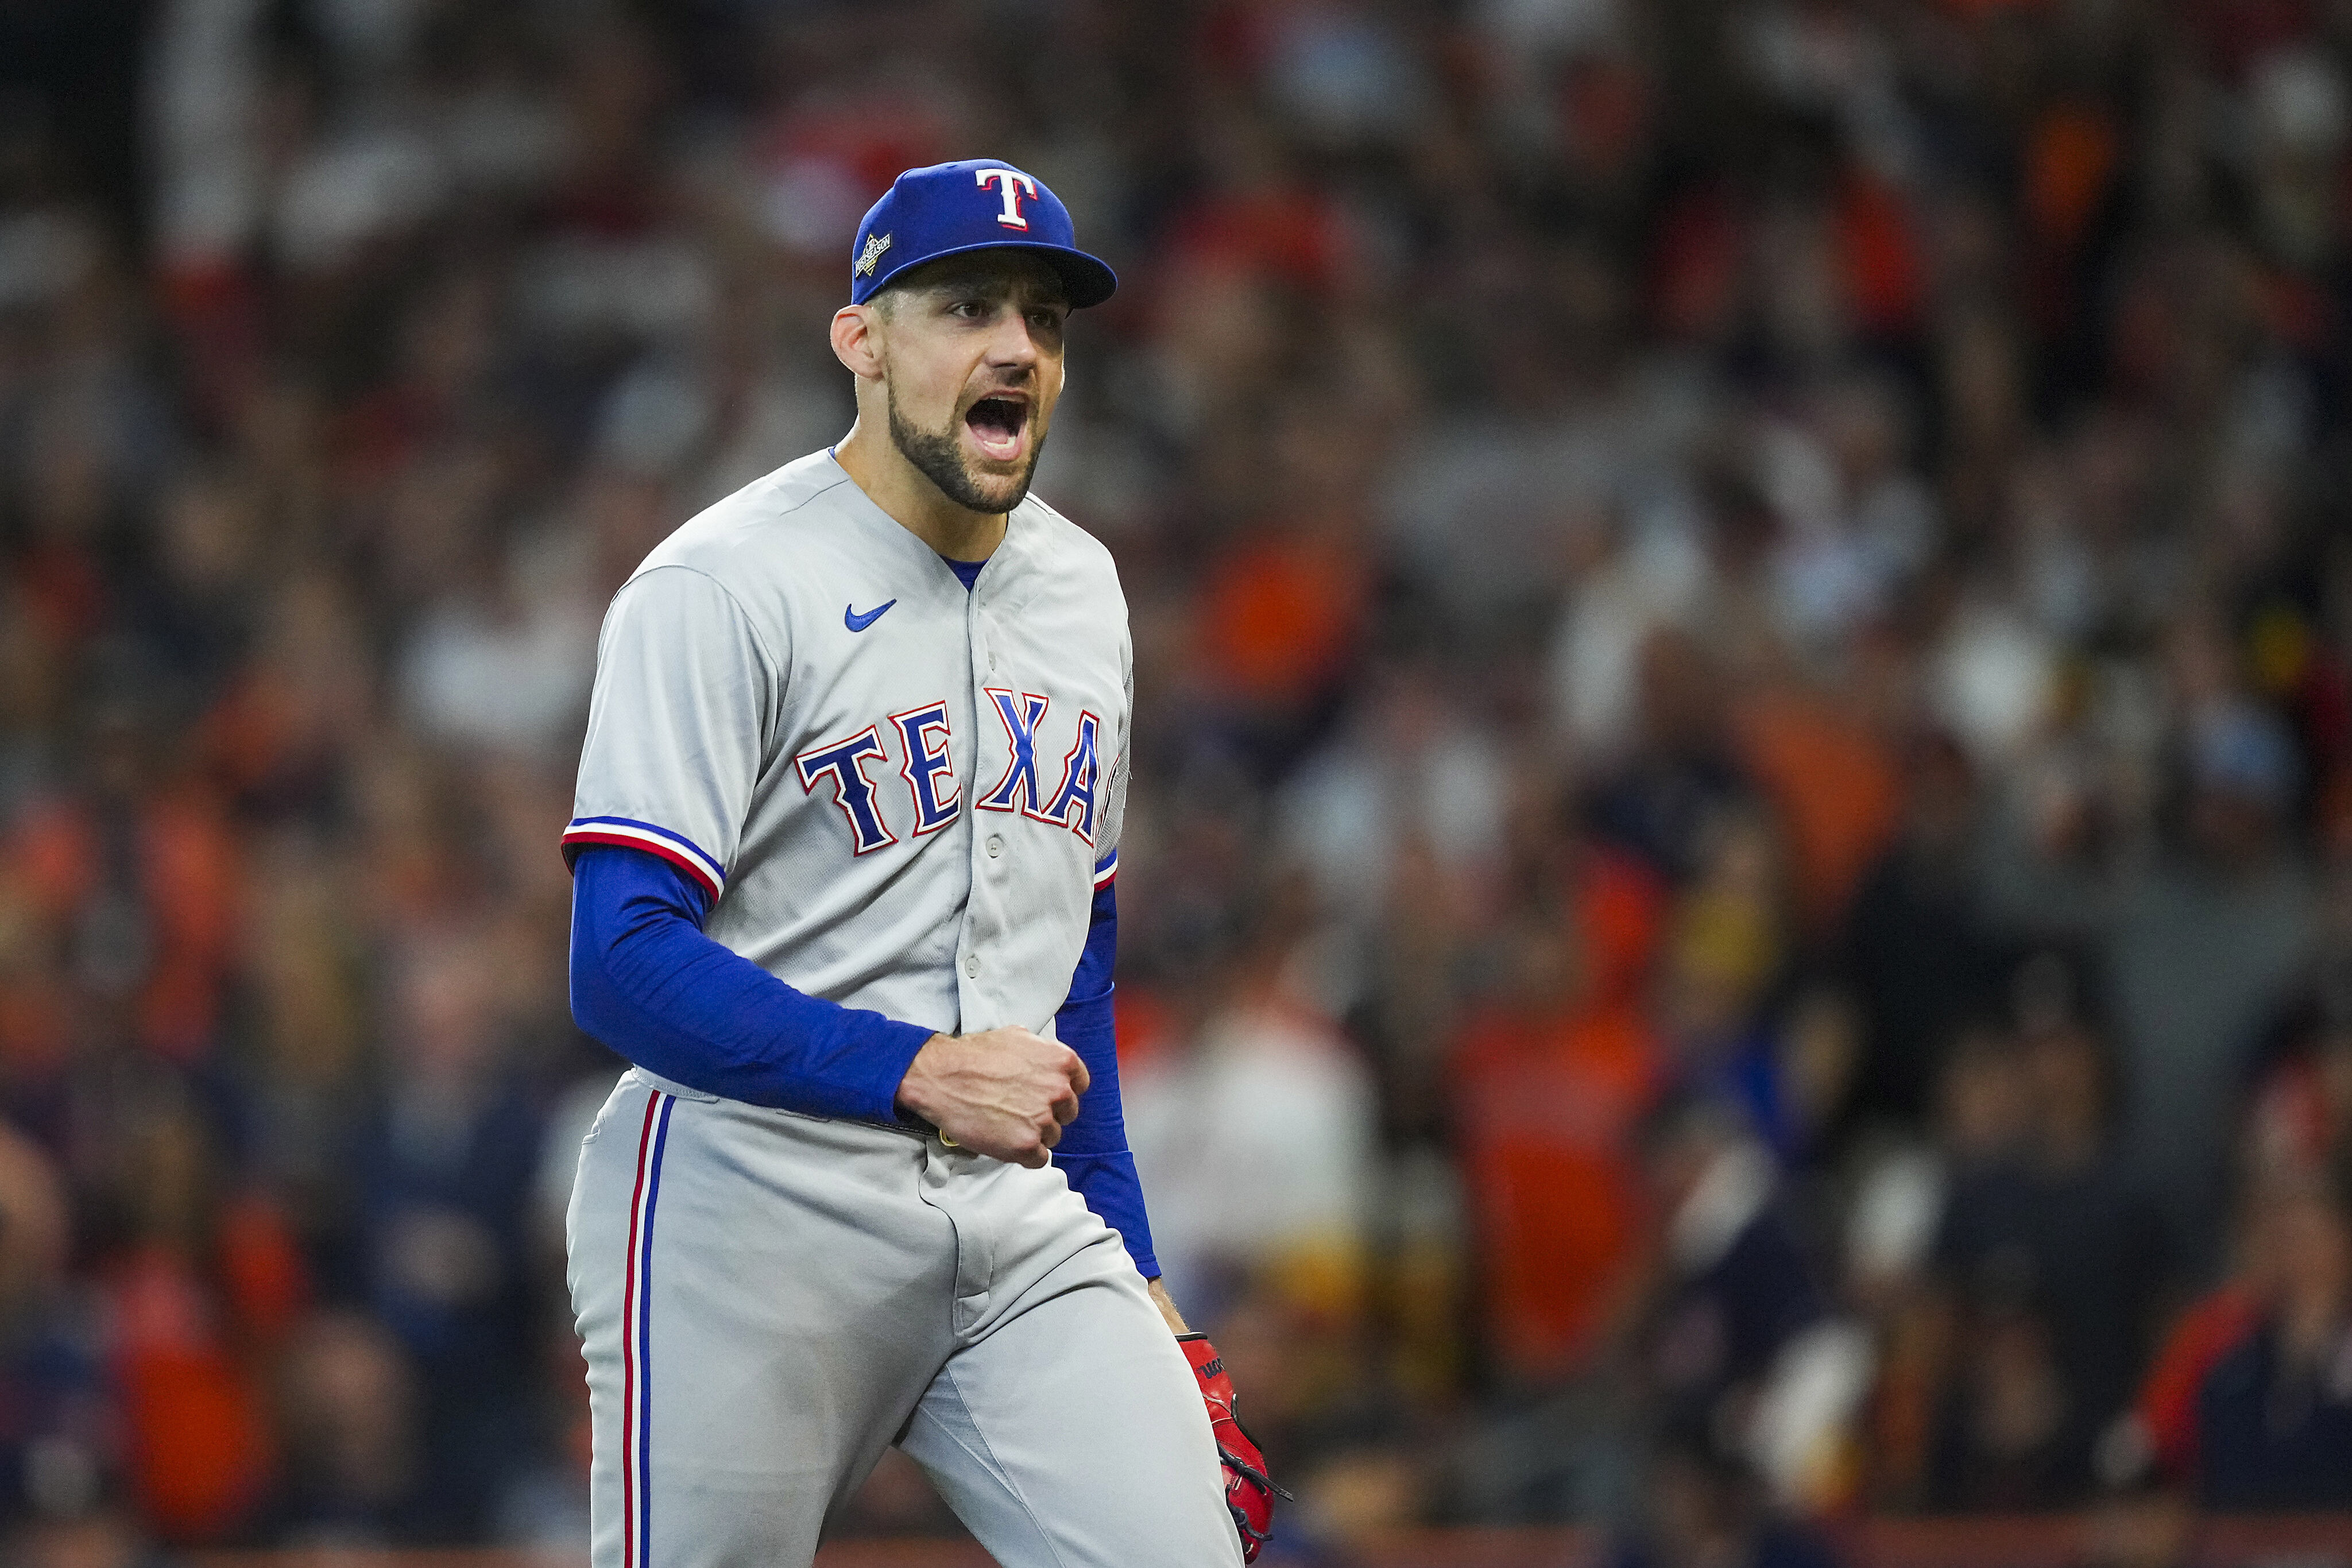 Jose Altuve helps lift Astros to World Series Game 2 win - The Washington  Post